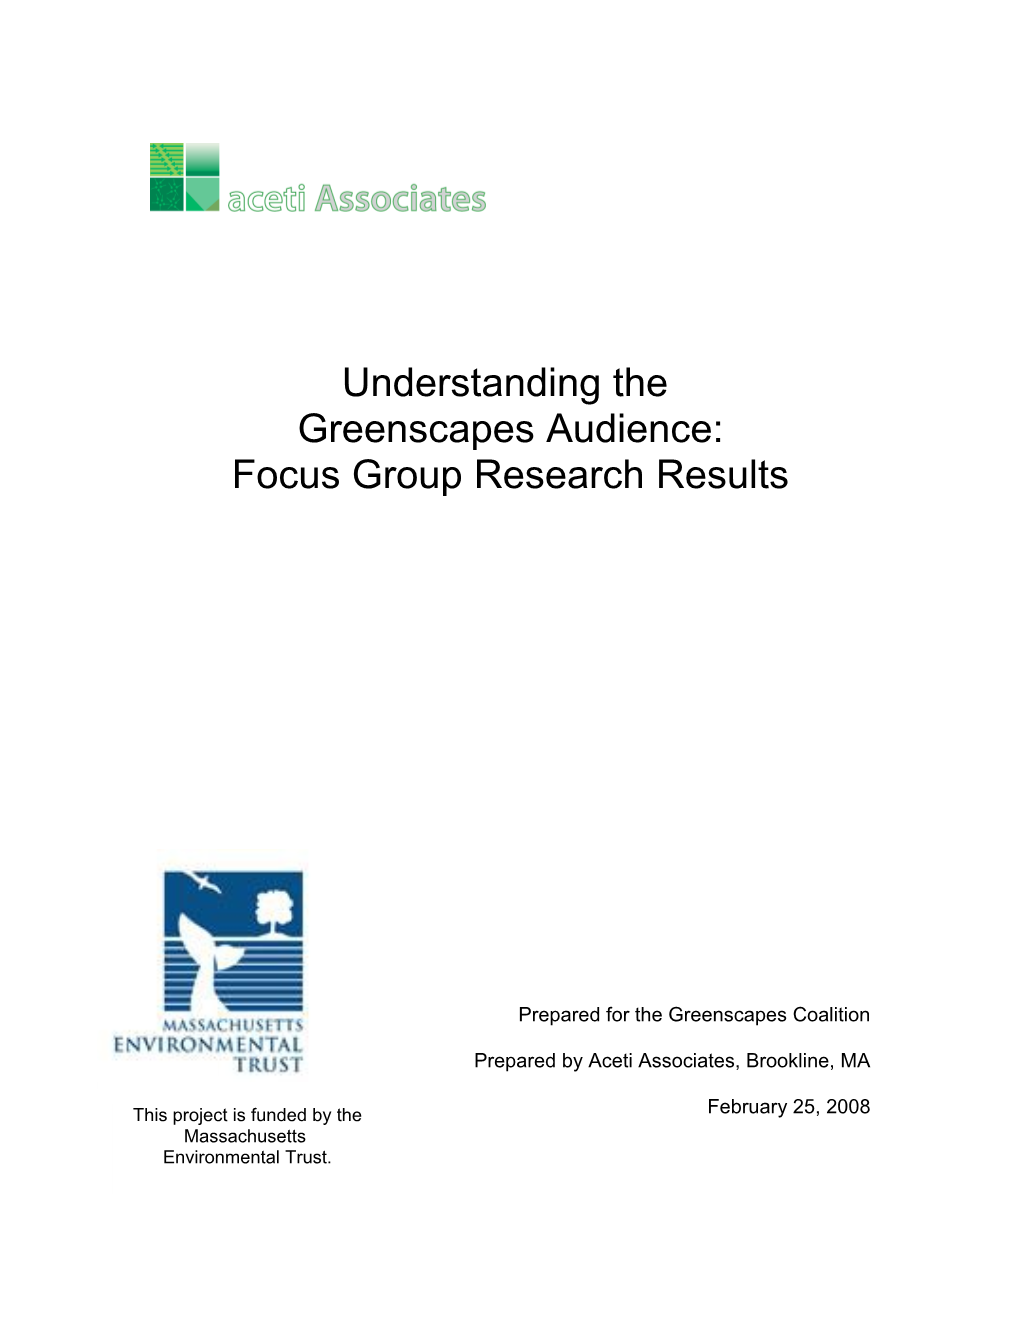 Focus Group Research Results